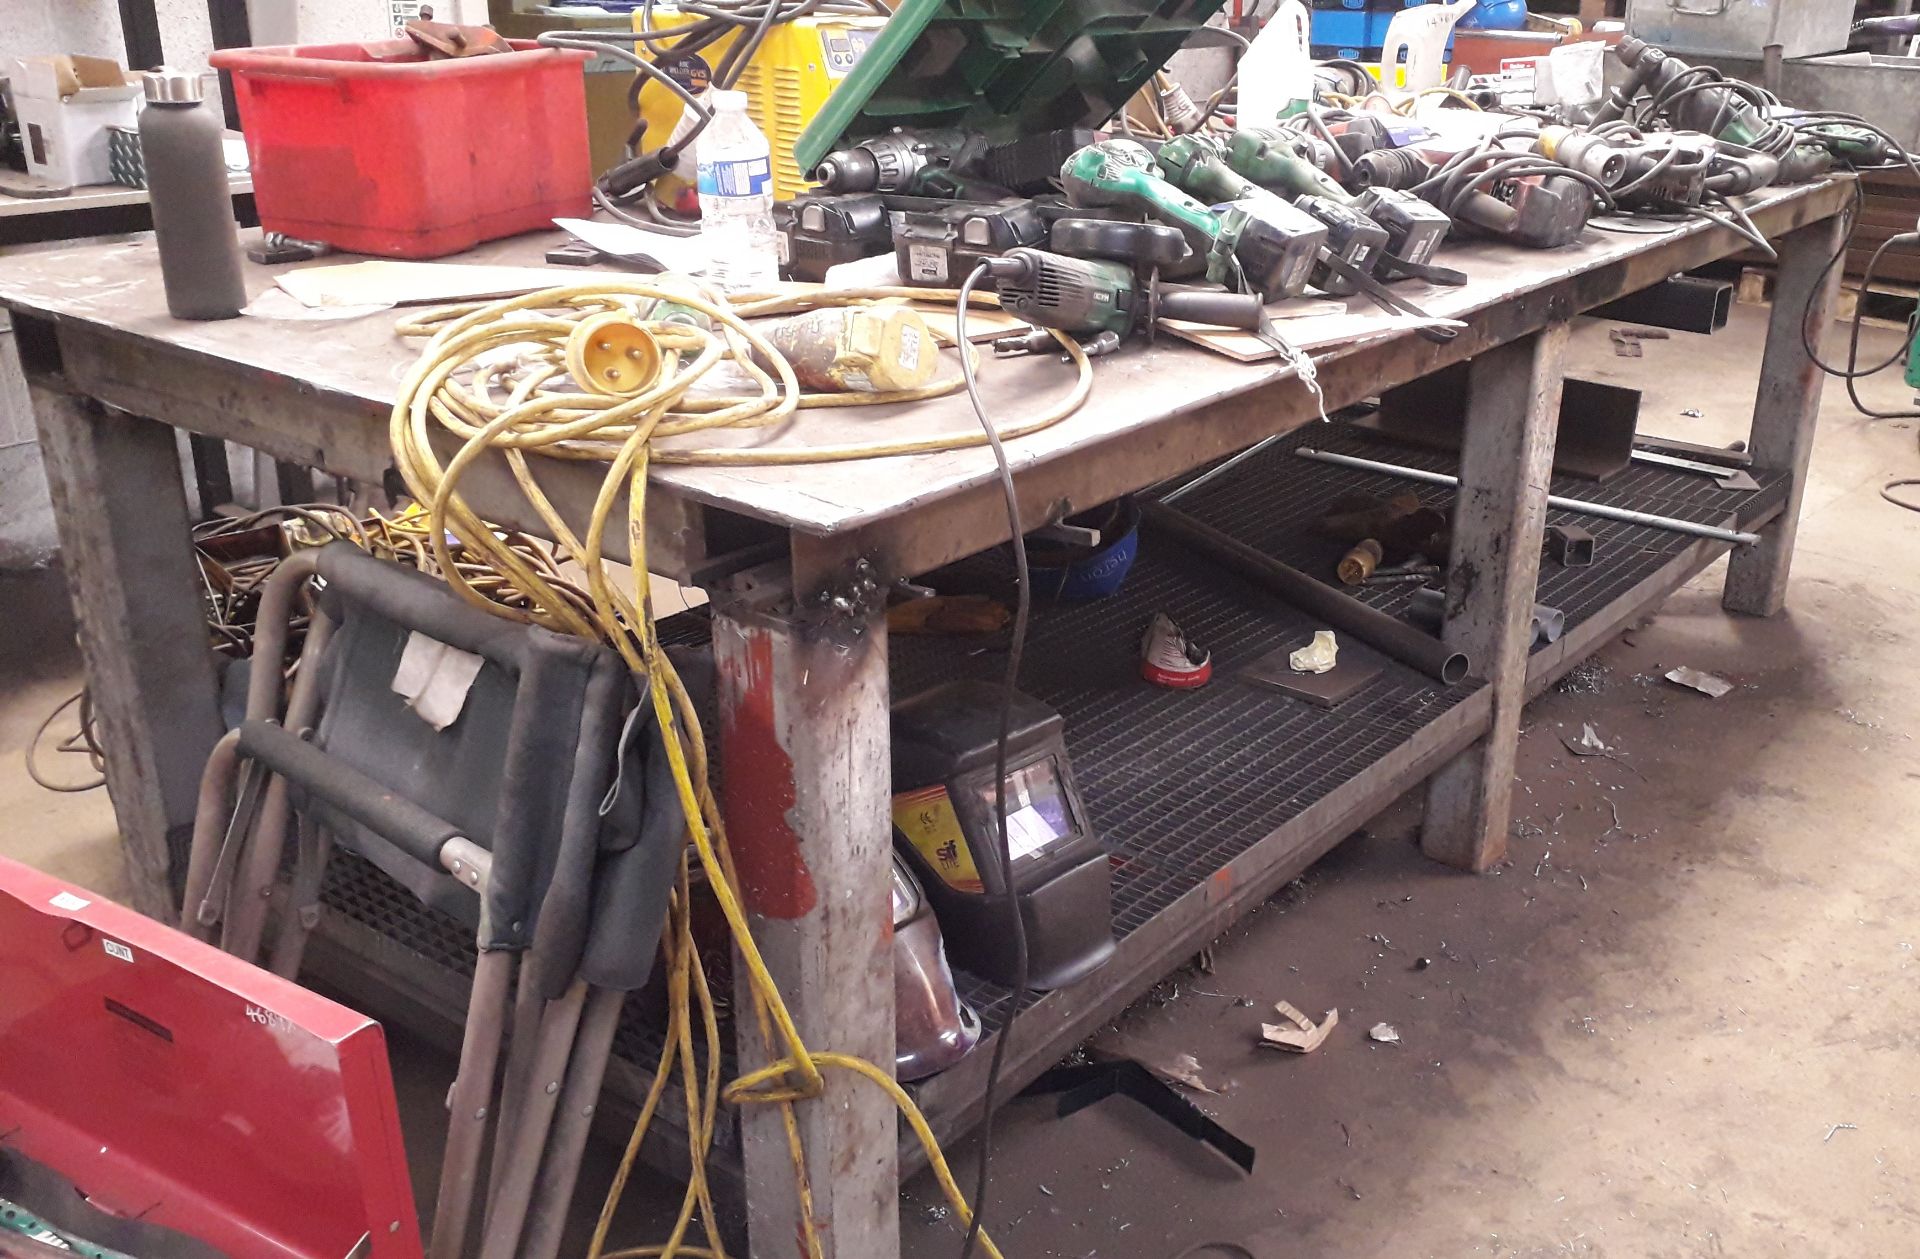 Steel Fabricated Welders Table (Contents not included)